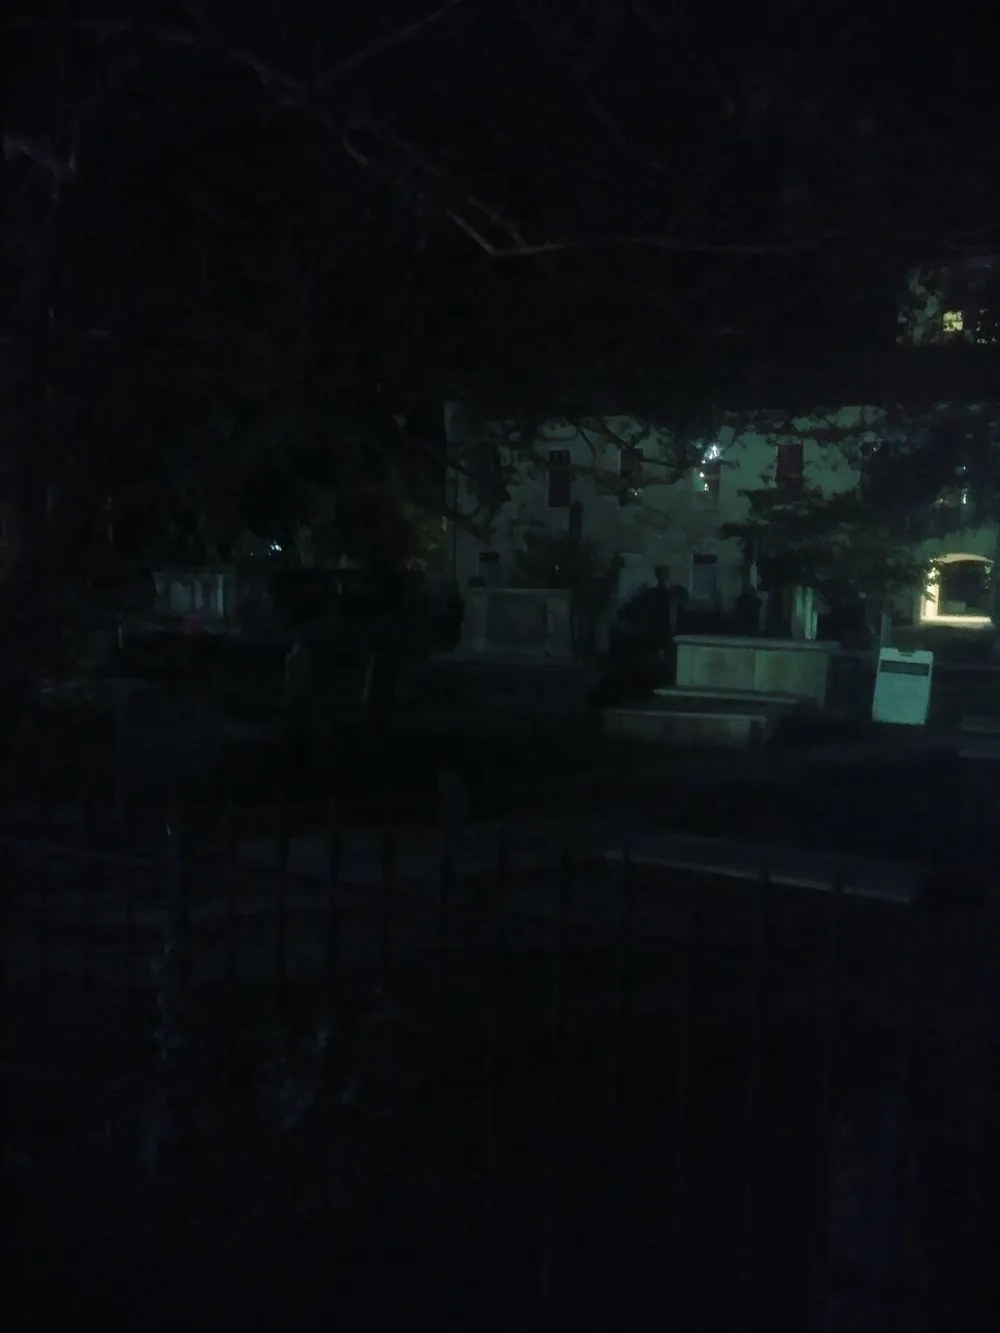 The image depicts a dimly lit outdoor scene at night with silhouettes of trees and a fence possibly in a garden or park with buildings faintly visible in the background